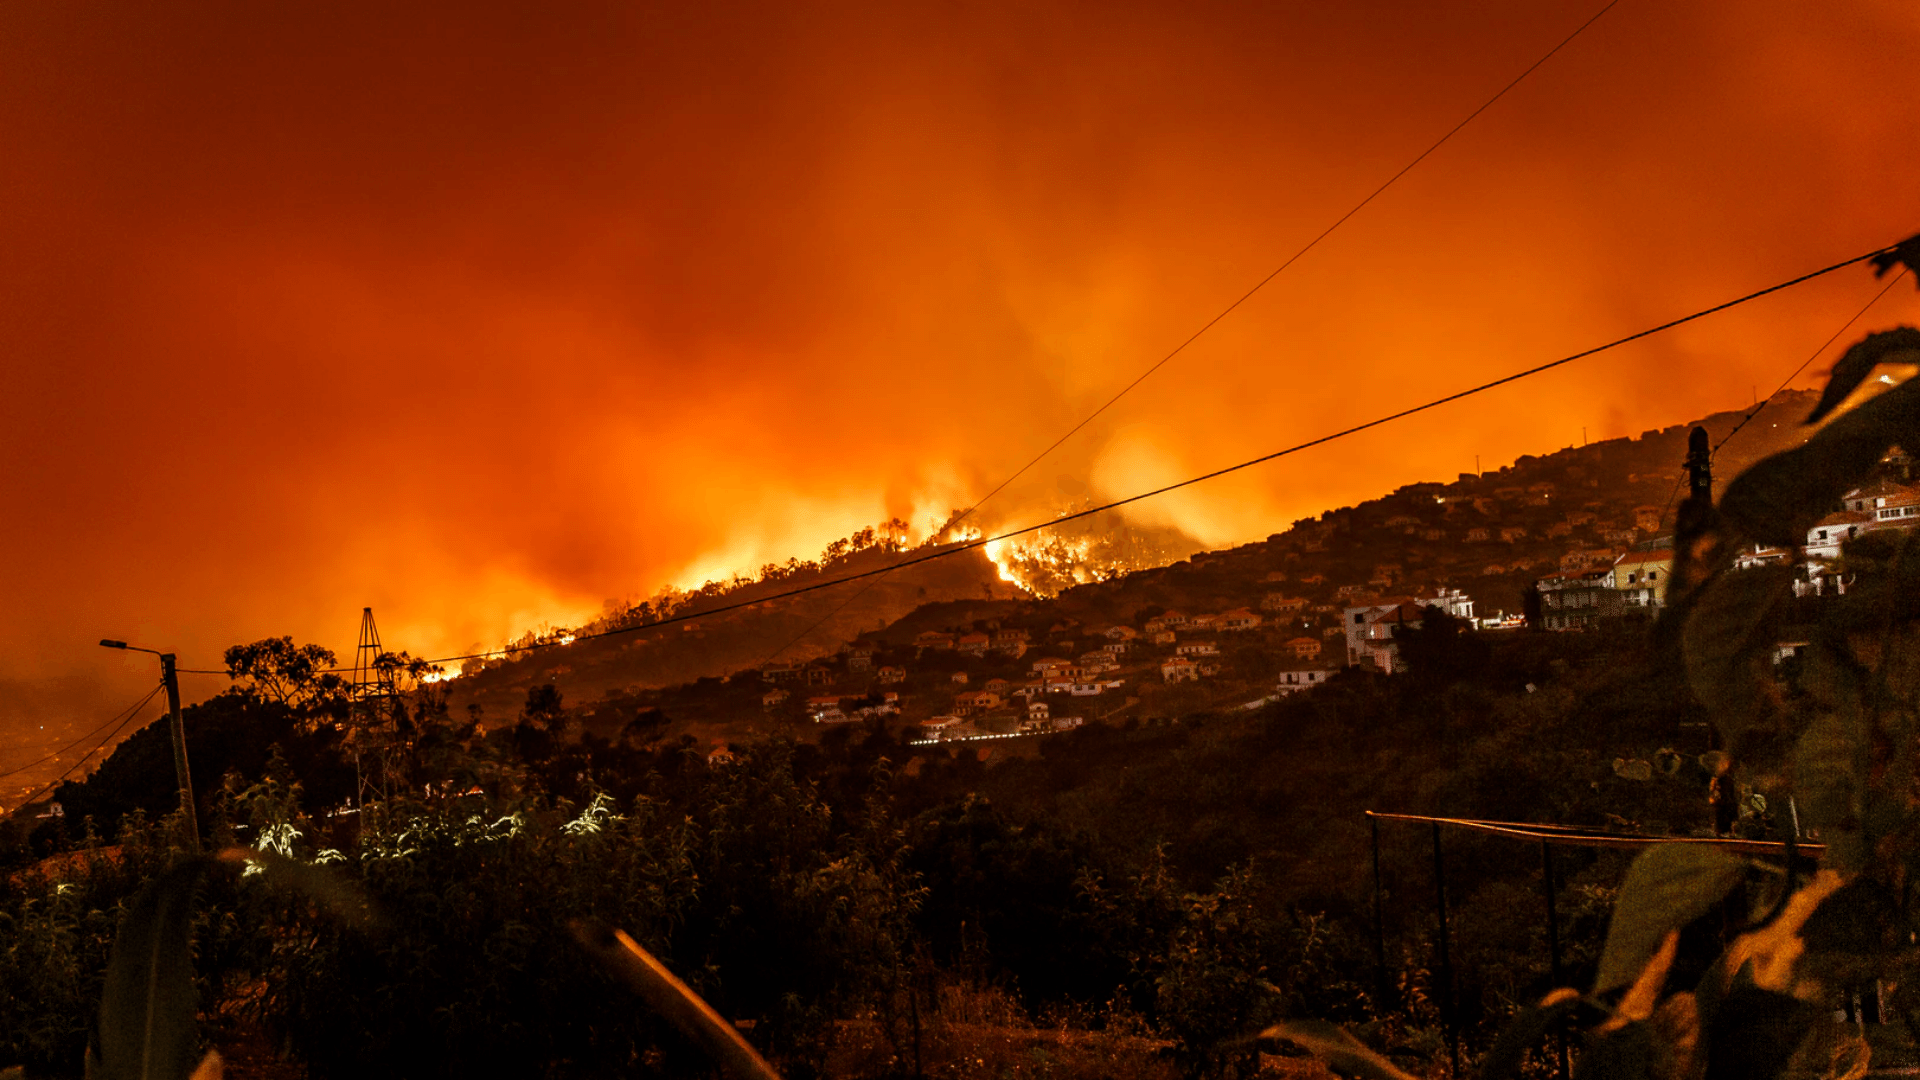 Scene of a wildfire on a hill at night. Houses are visible on the hillside. The sky is filled with an orange glow from the flames and smoke.